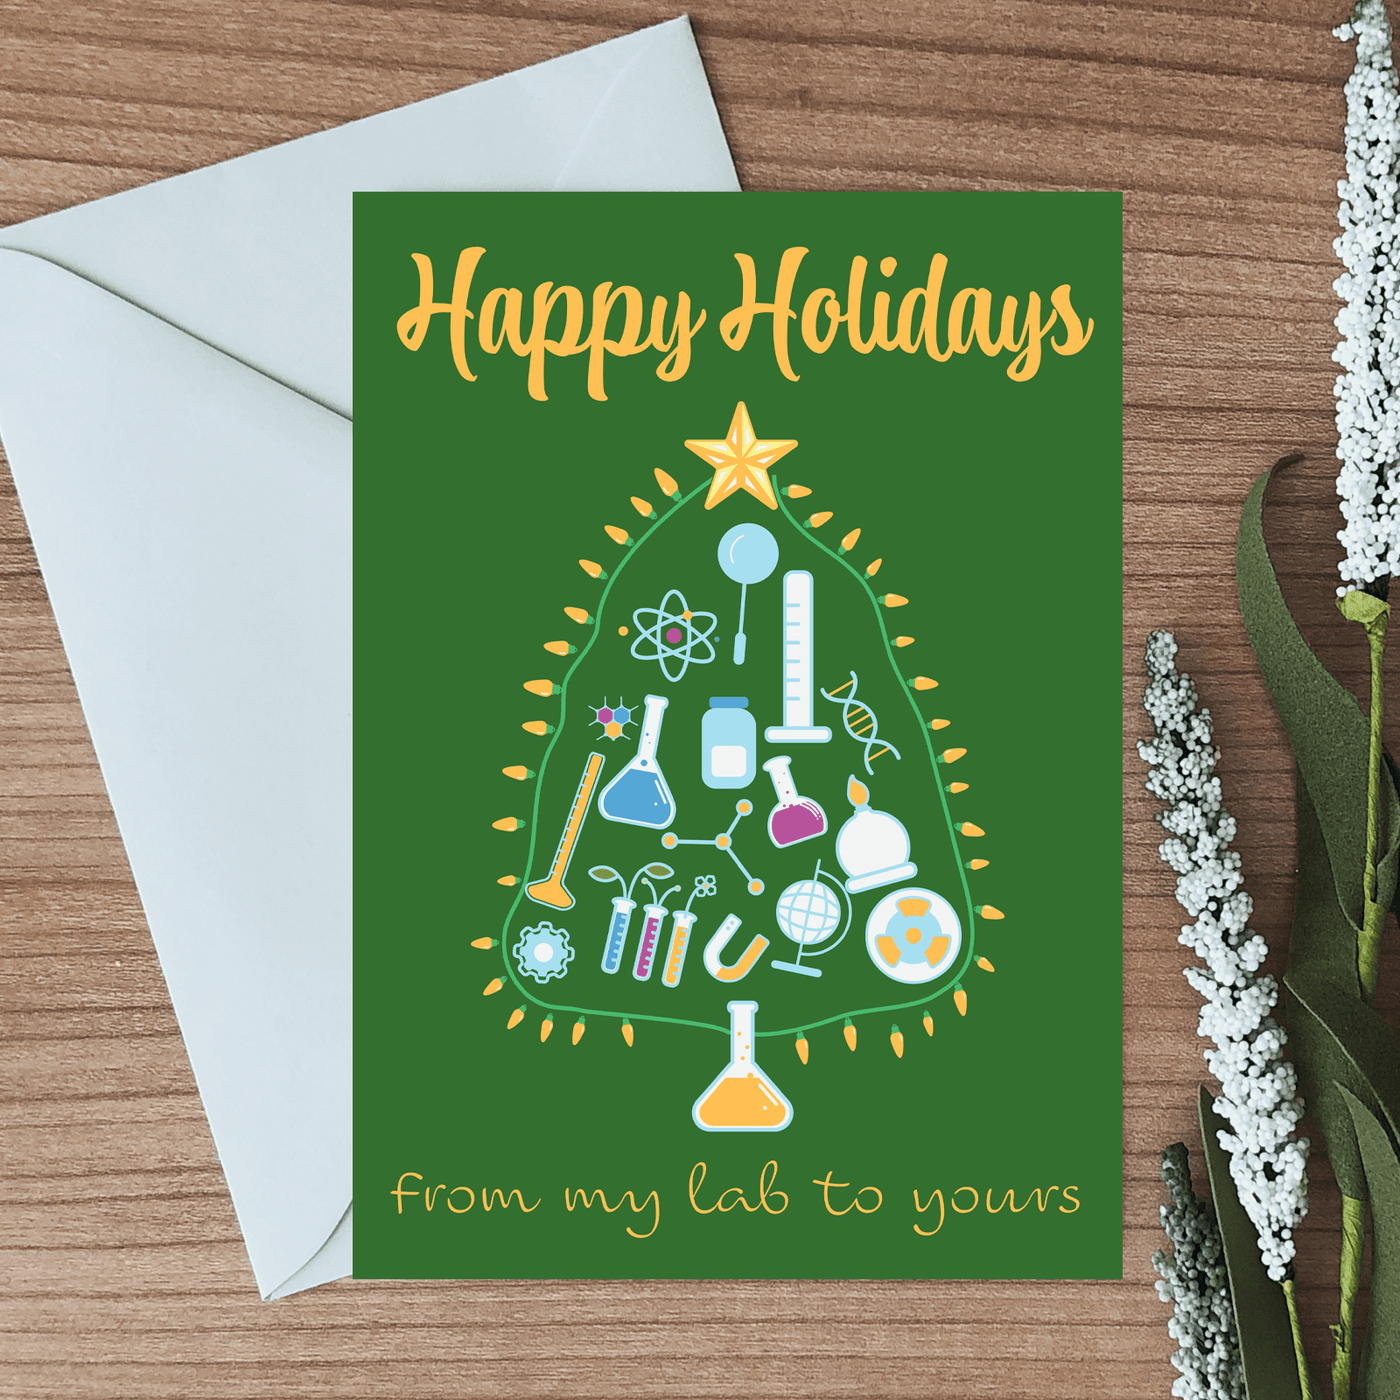 blank inside greeting card with a picture of a holiday tree made of lab equipment and a message wishing them a happy holidays from my lab to yours